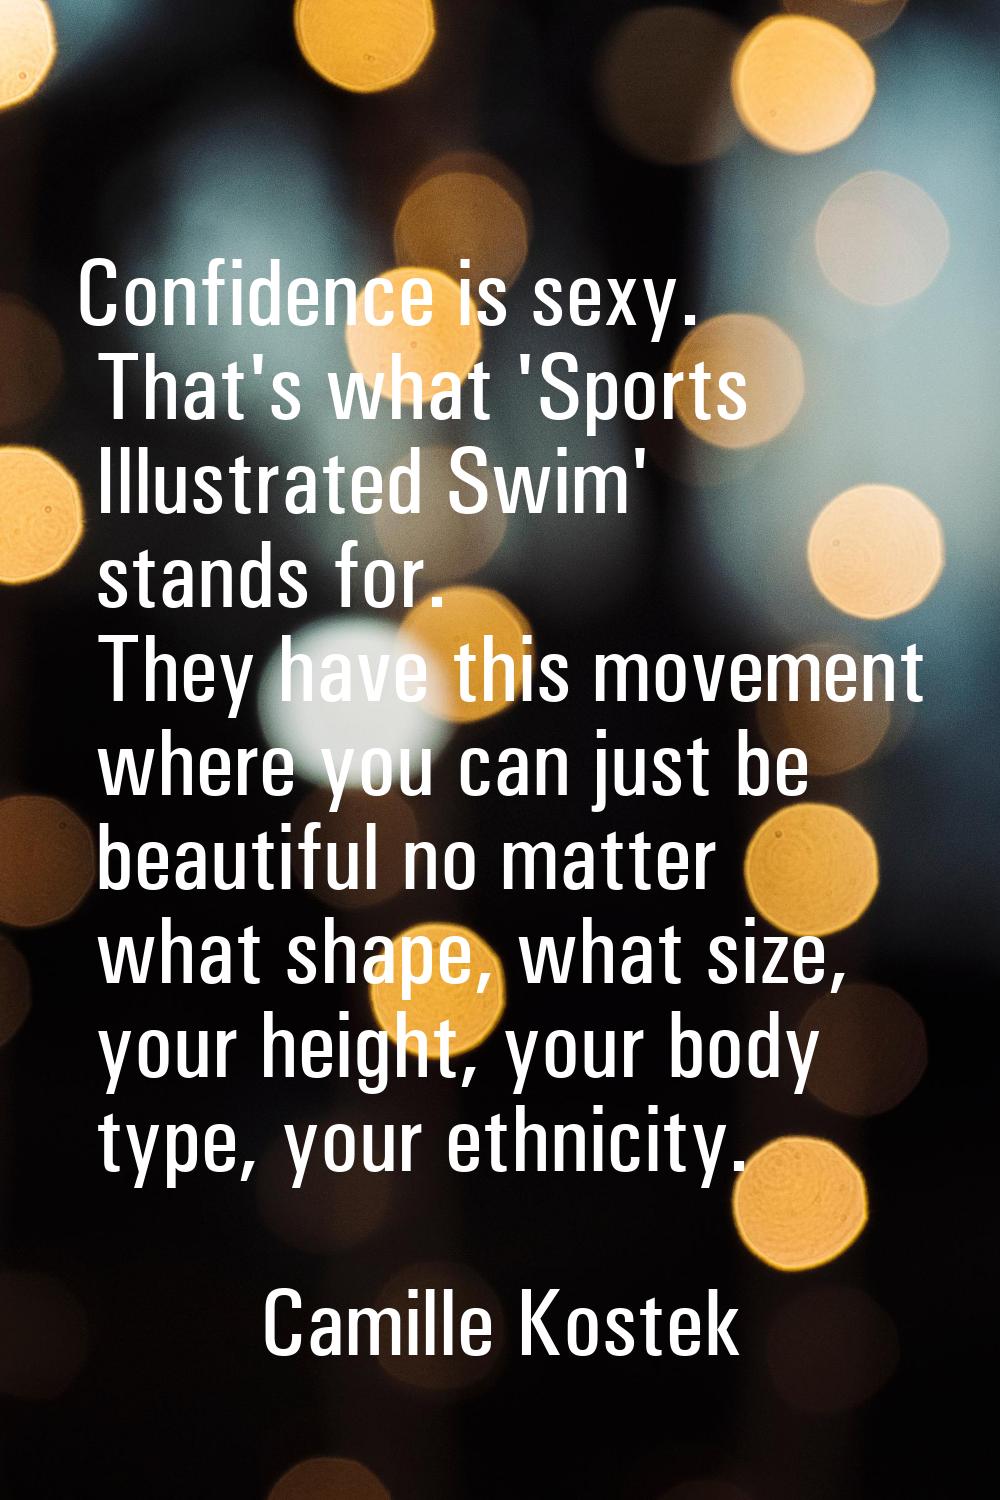 Confidence is sexy. That's what 'Sports Illustrated Swim' stands for. They have this movement where